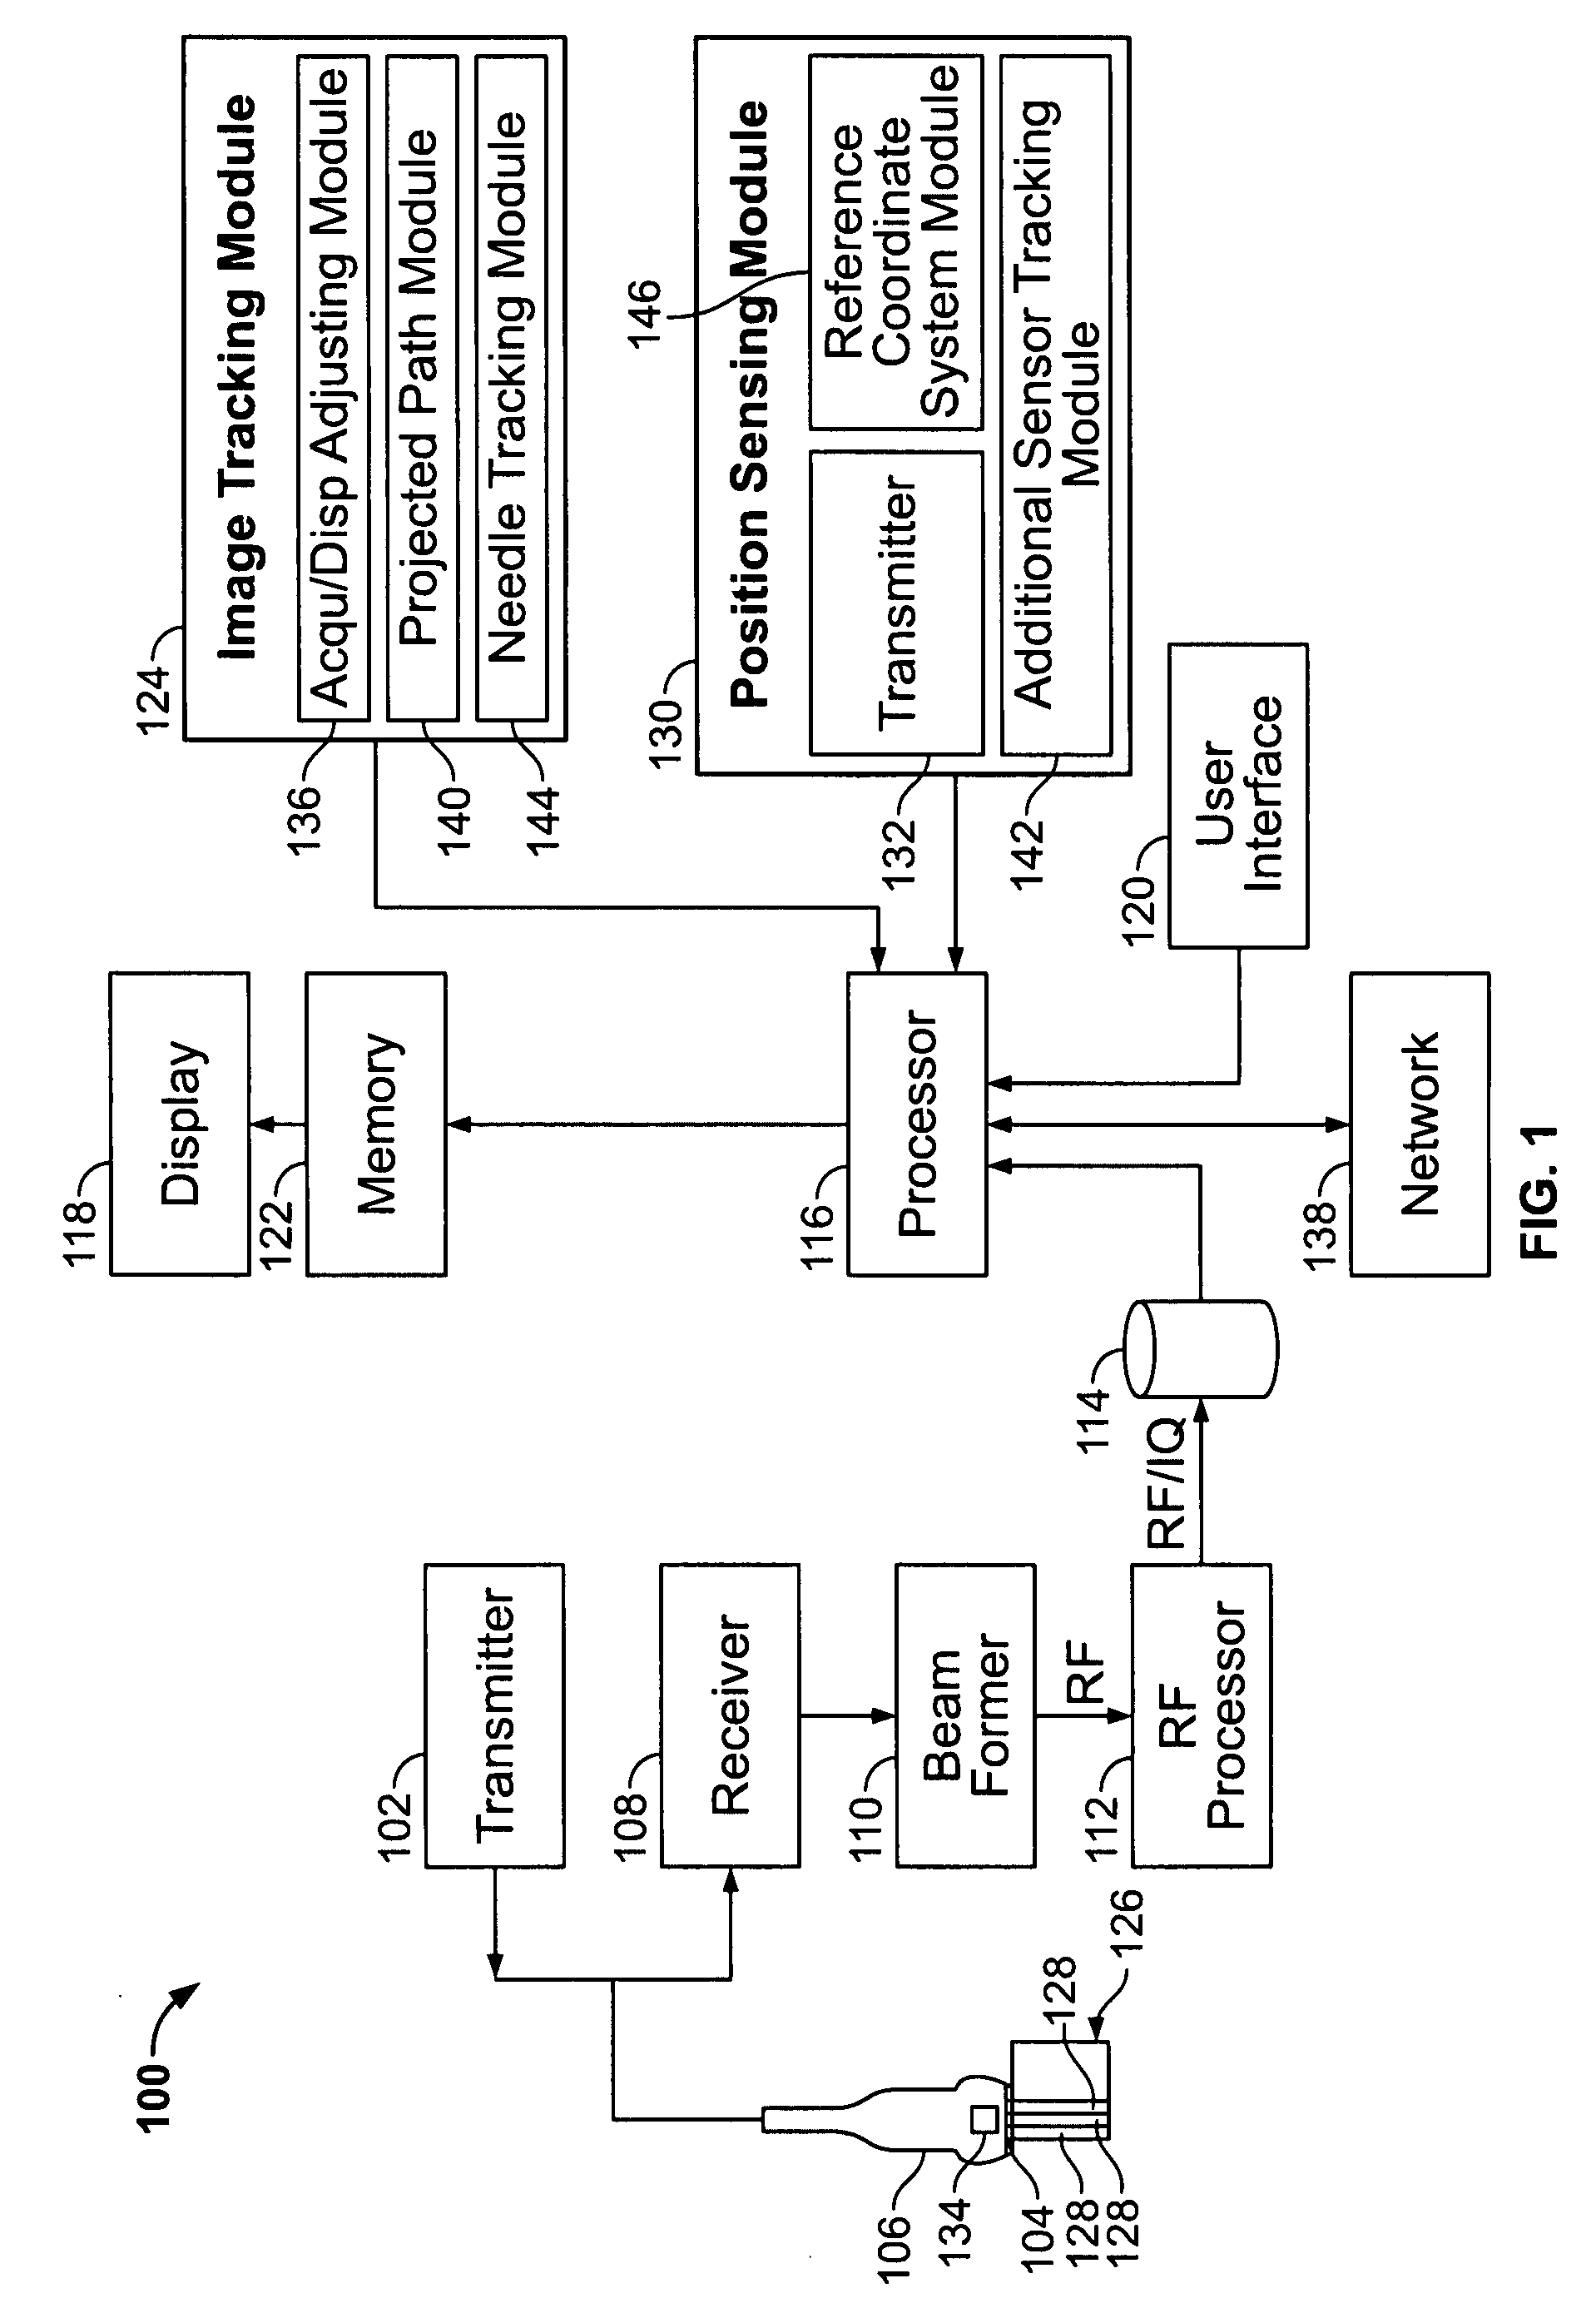 Method and apparatus for tracking points in an ultrasound image